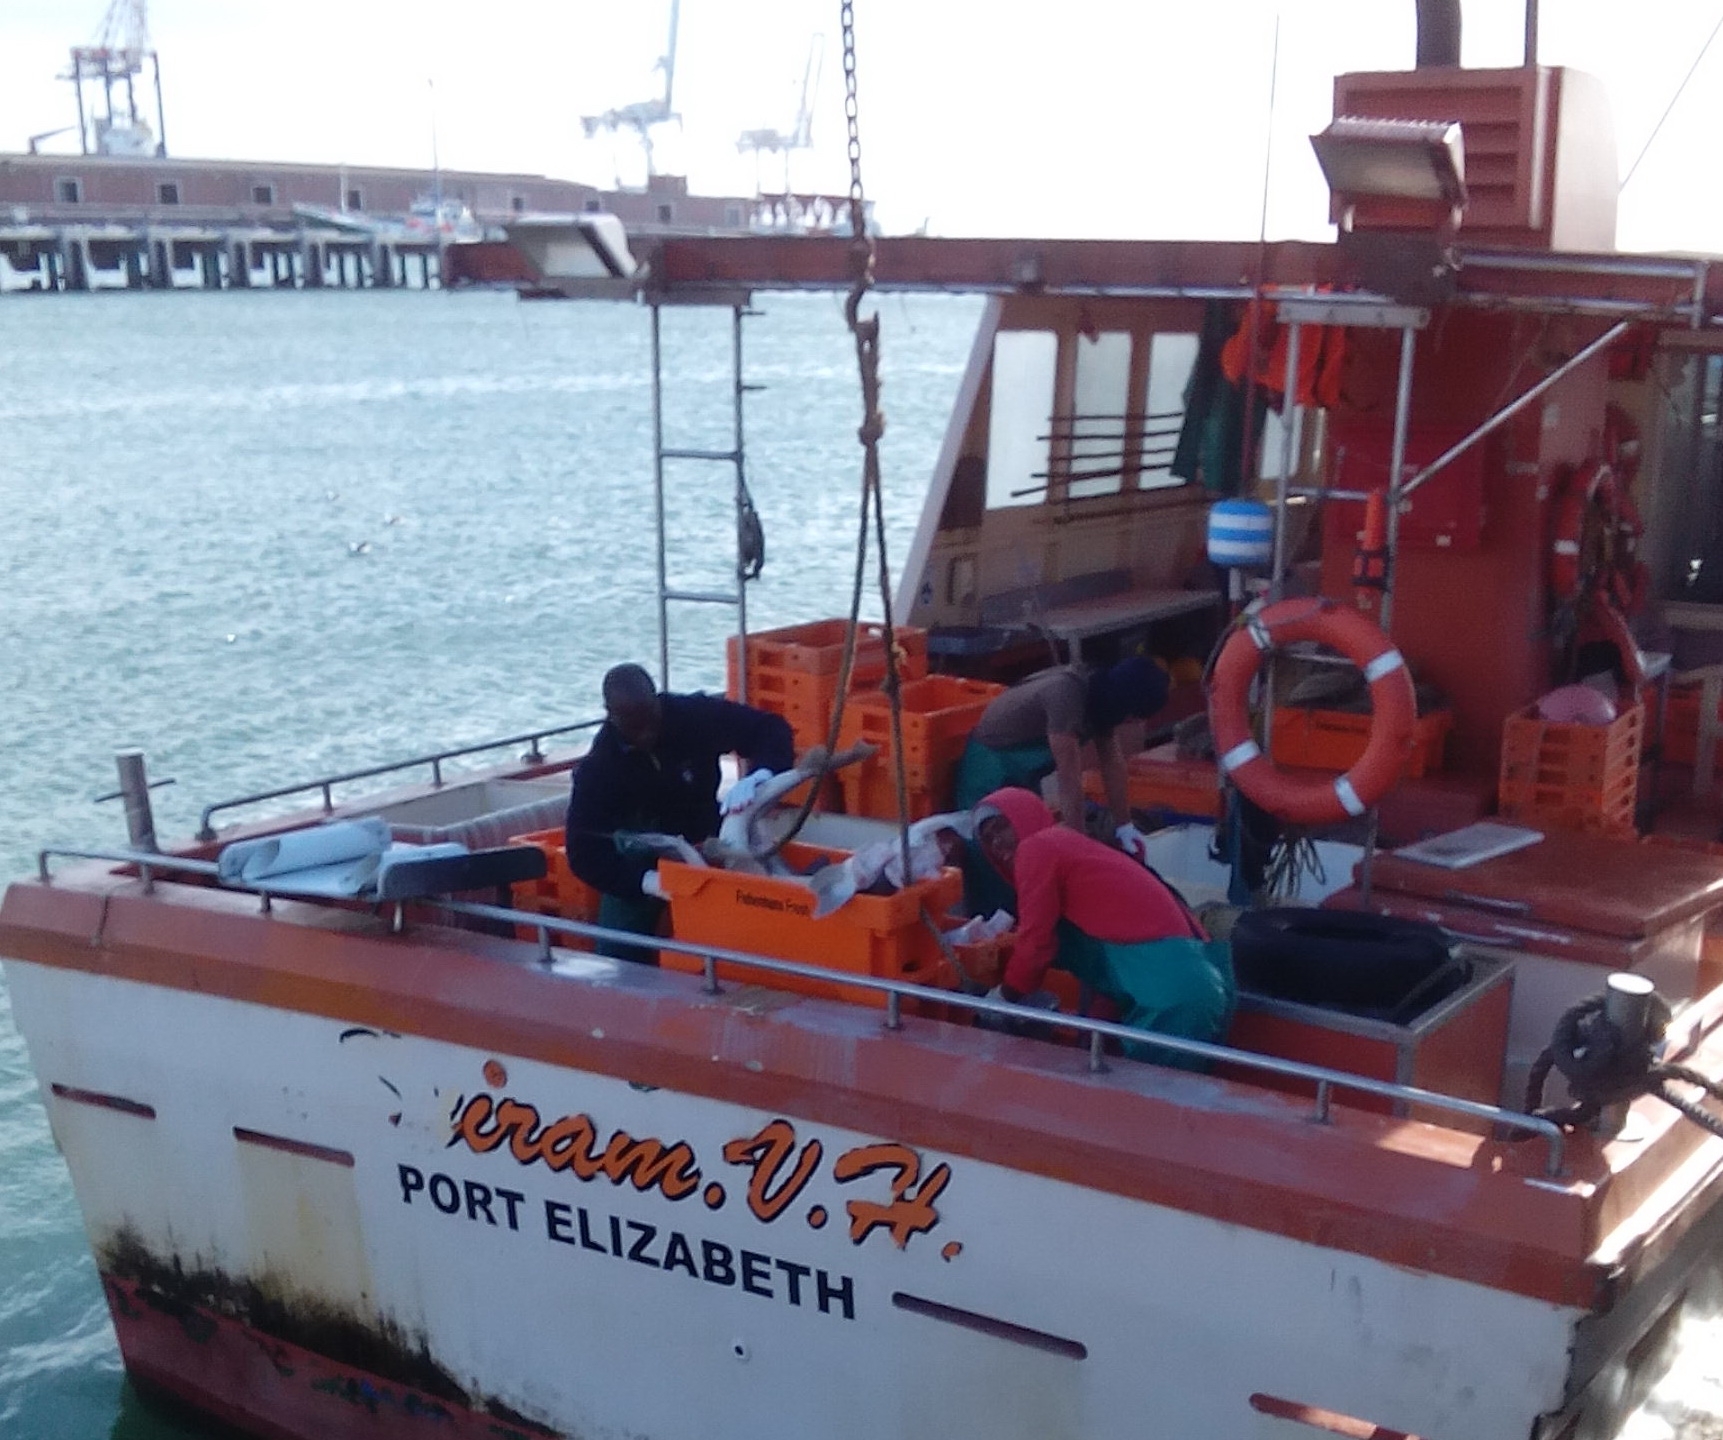 The fishing boat with a license for dogfish from Port Elizabeth
(c) Jens Höptner